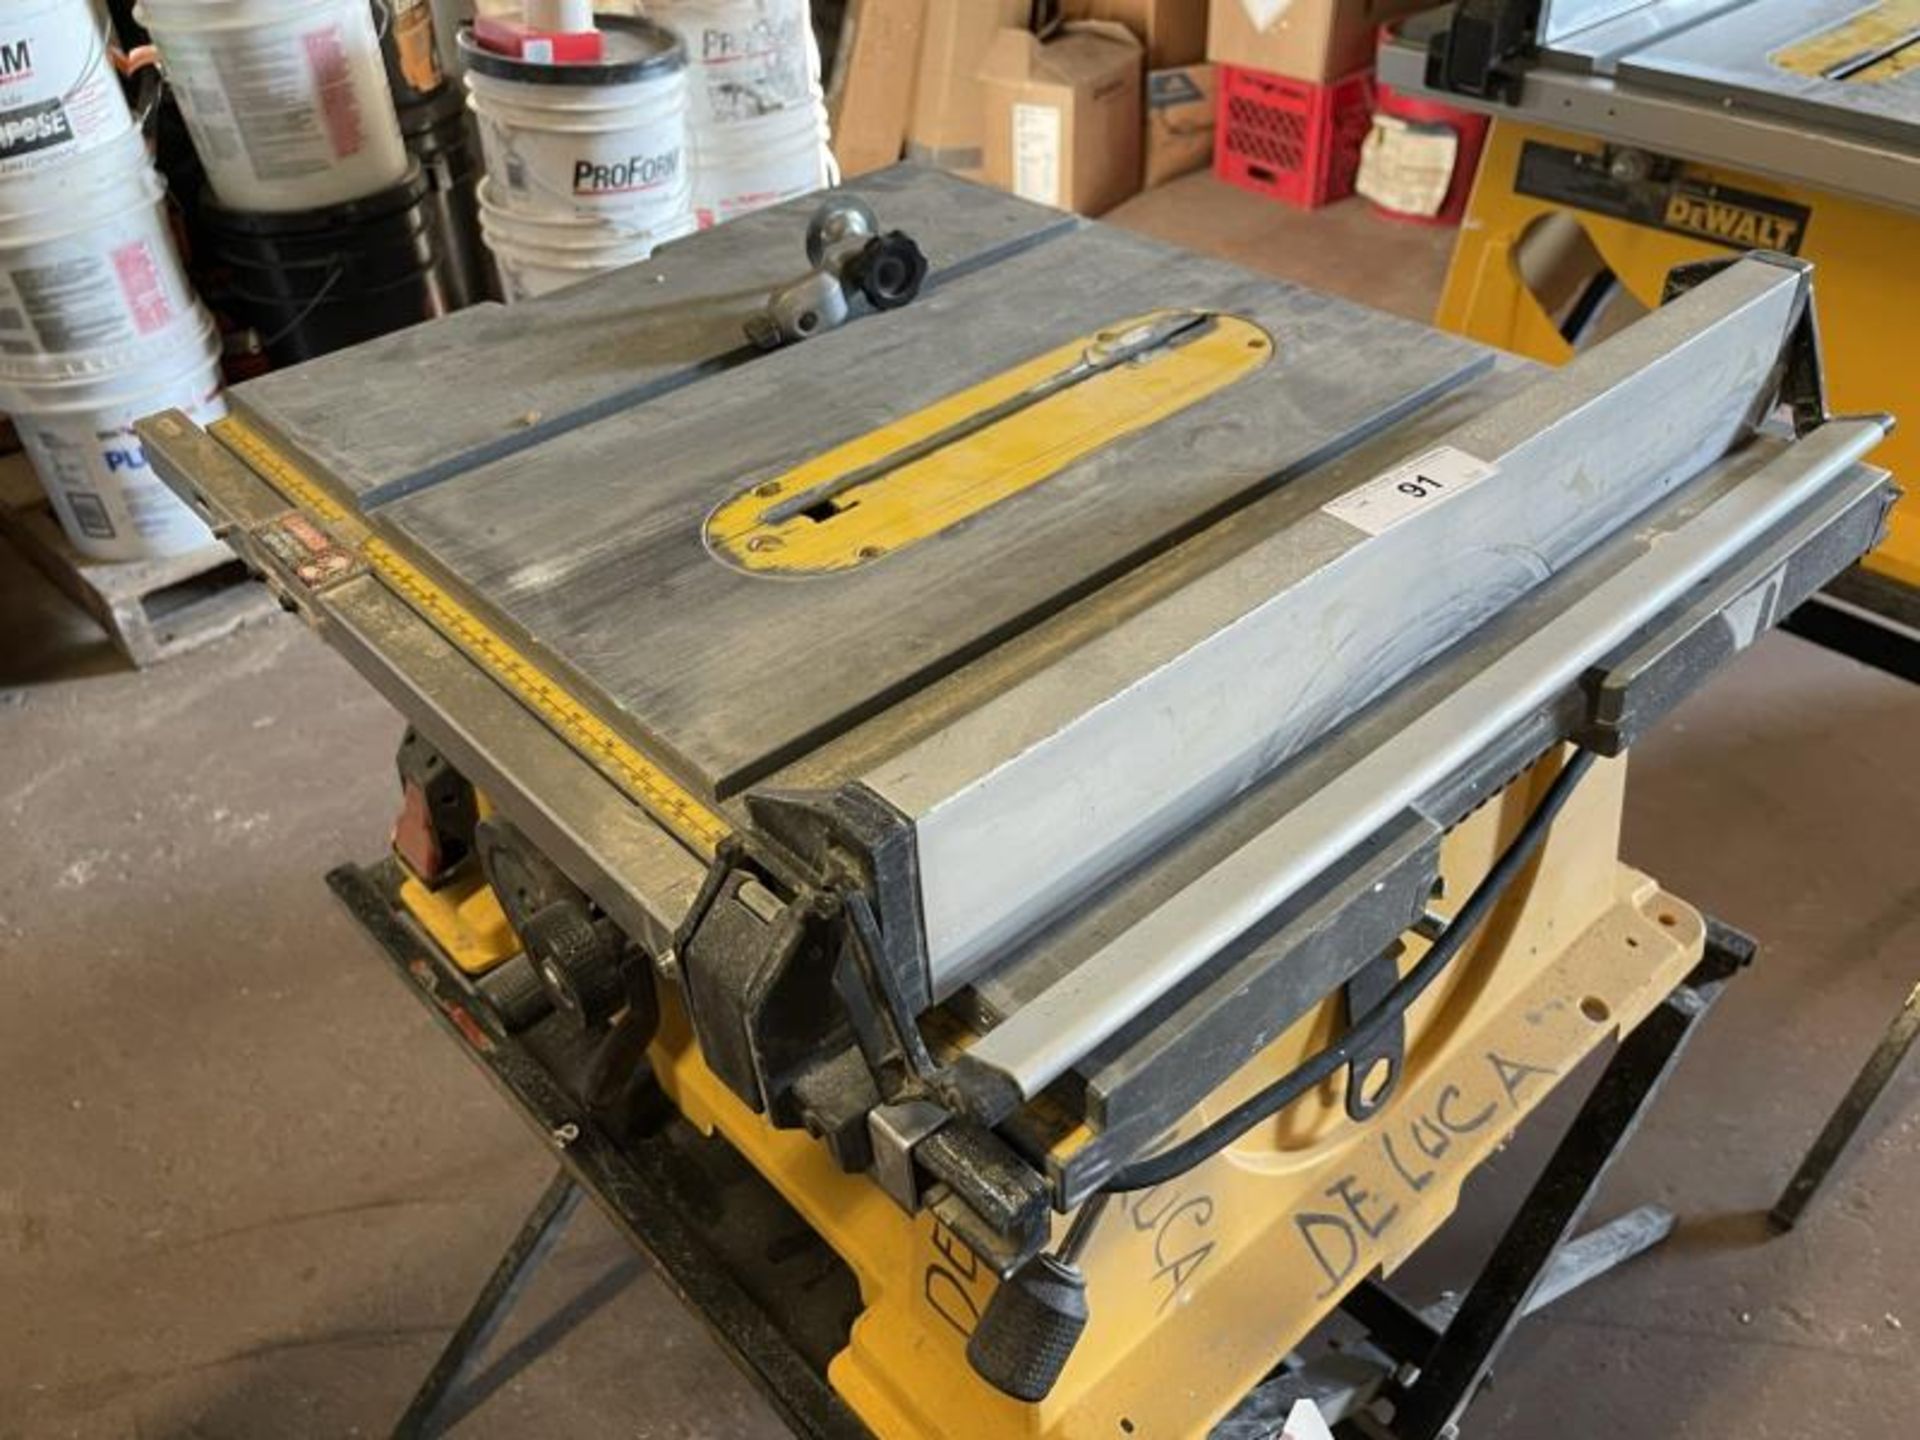 DeWalt collapsible Table Saw M: DW744 - Image 5 of 6